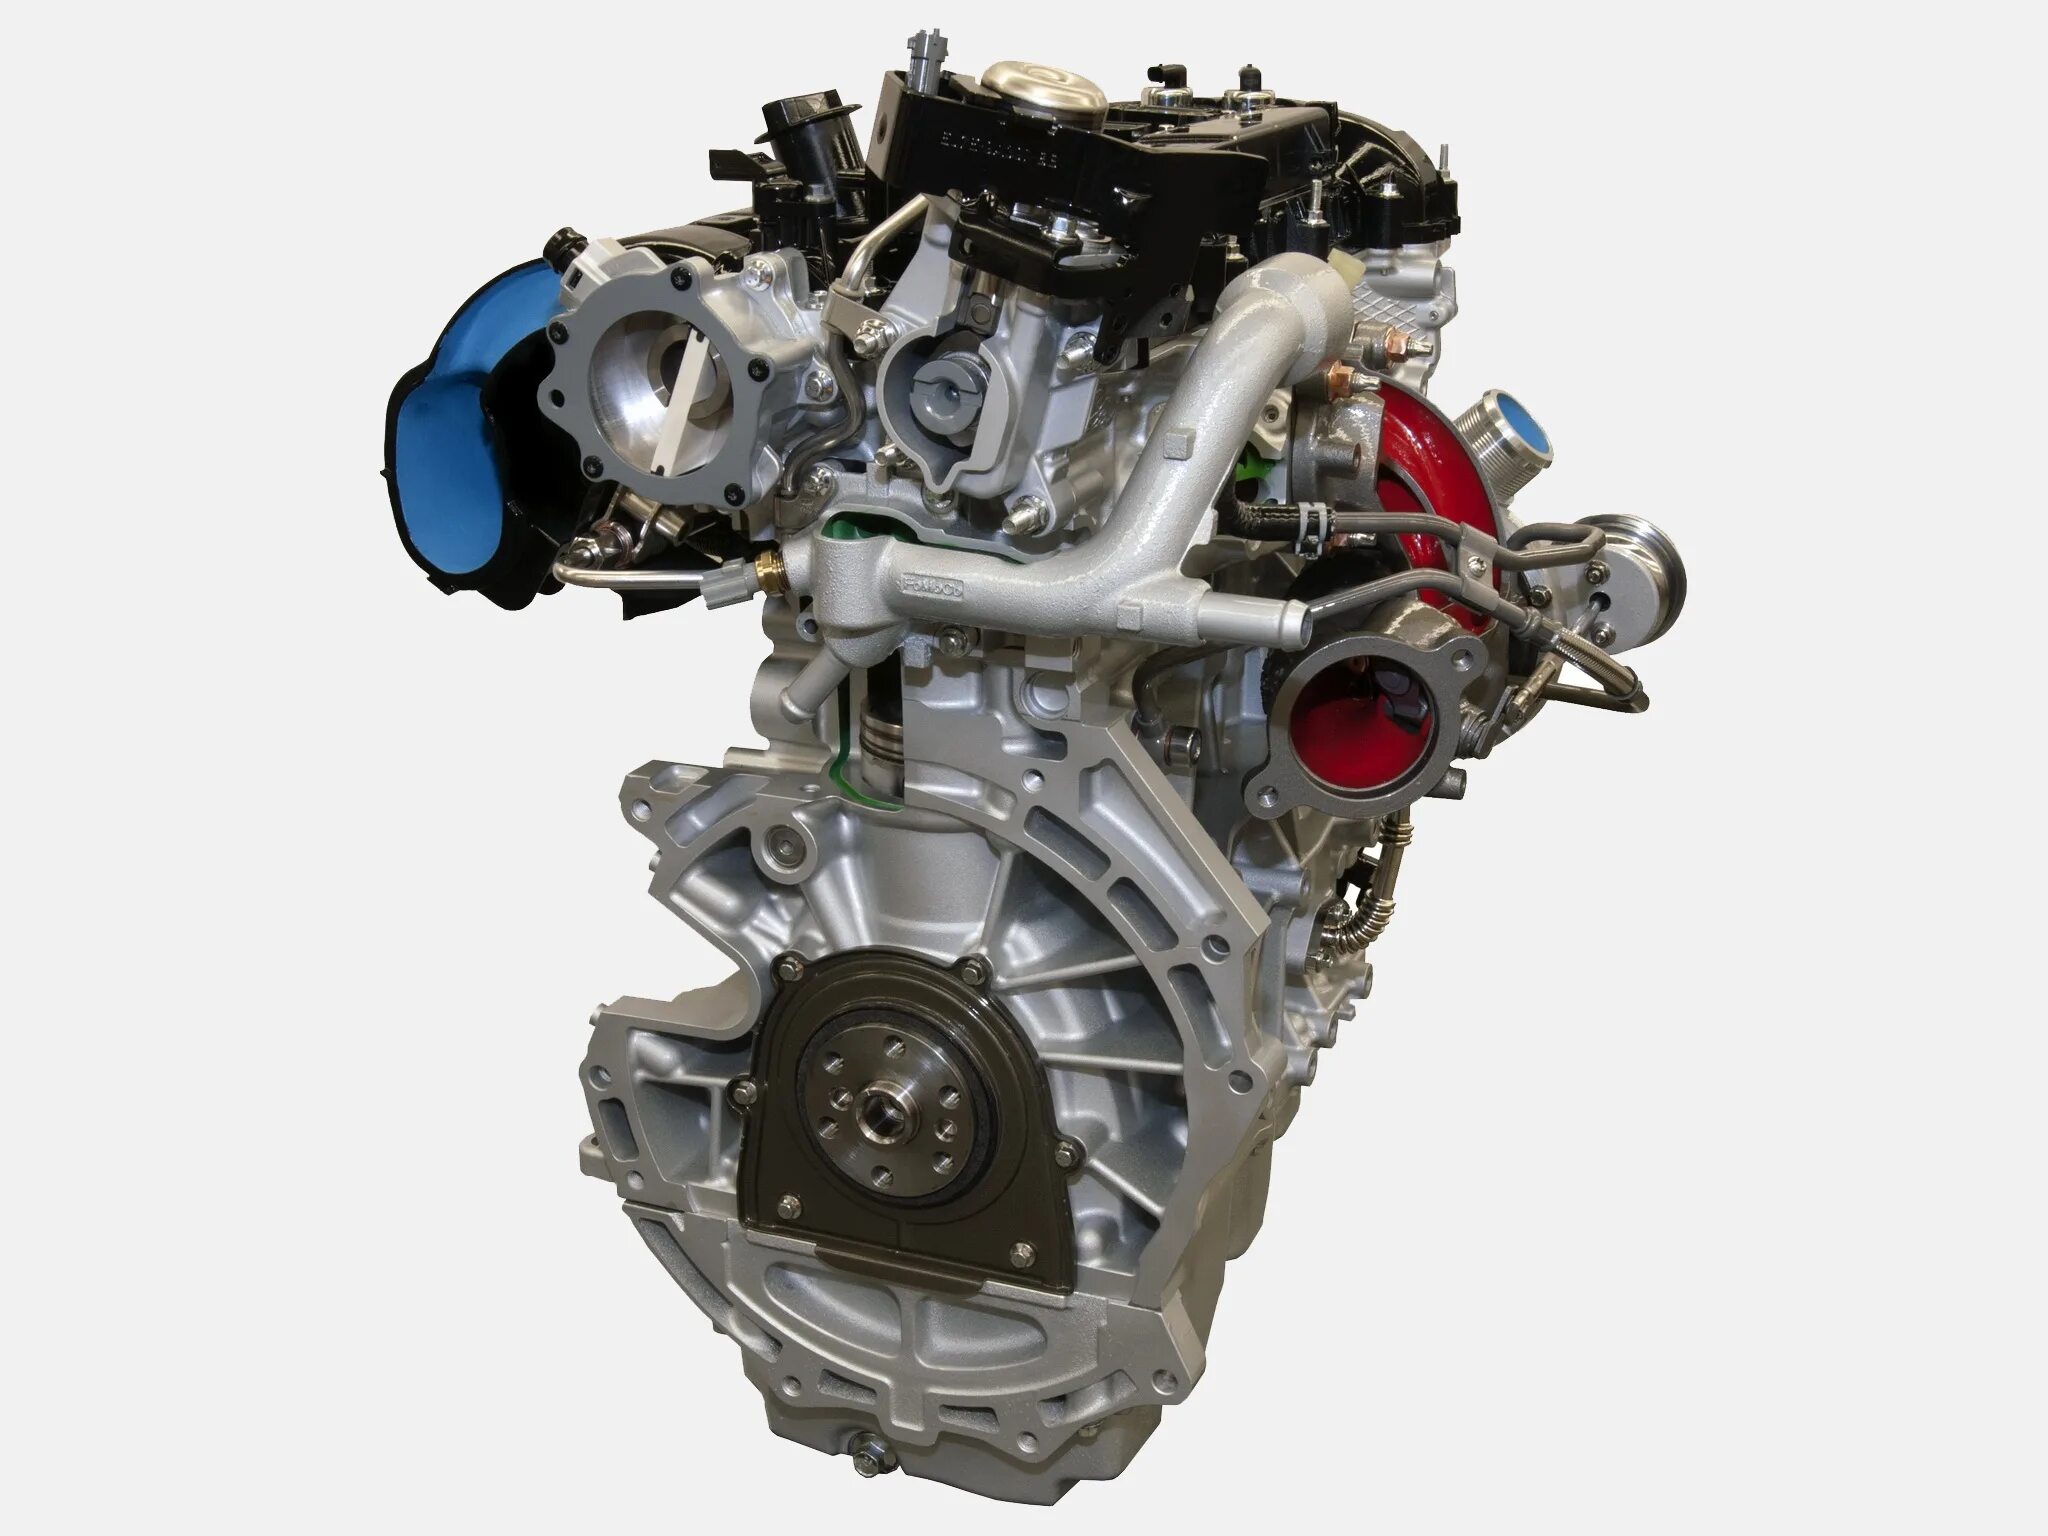 2.3 ECOBOOST Mustang мотор. Ford ECOBOOST 2.3. Ford Mustang ECOBOOST 2.3 двигатель. Форт Мустанг экобуст 2.3 л.